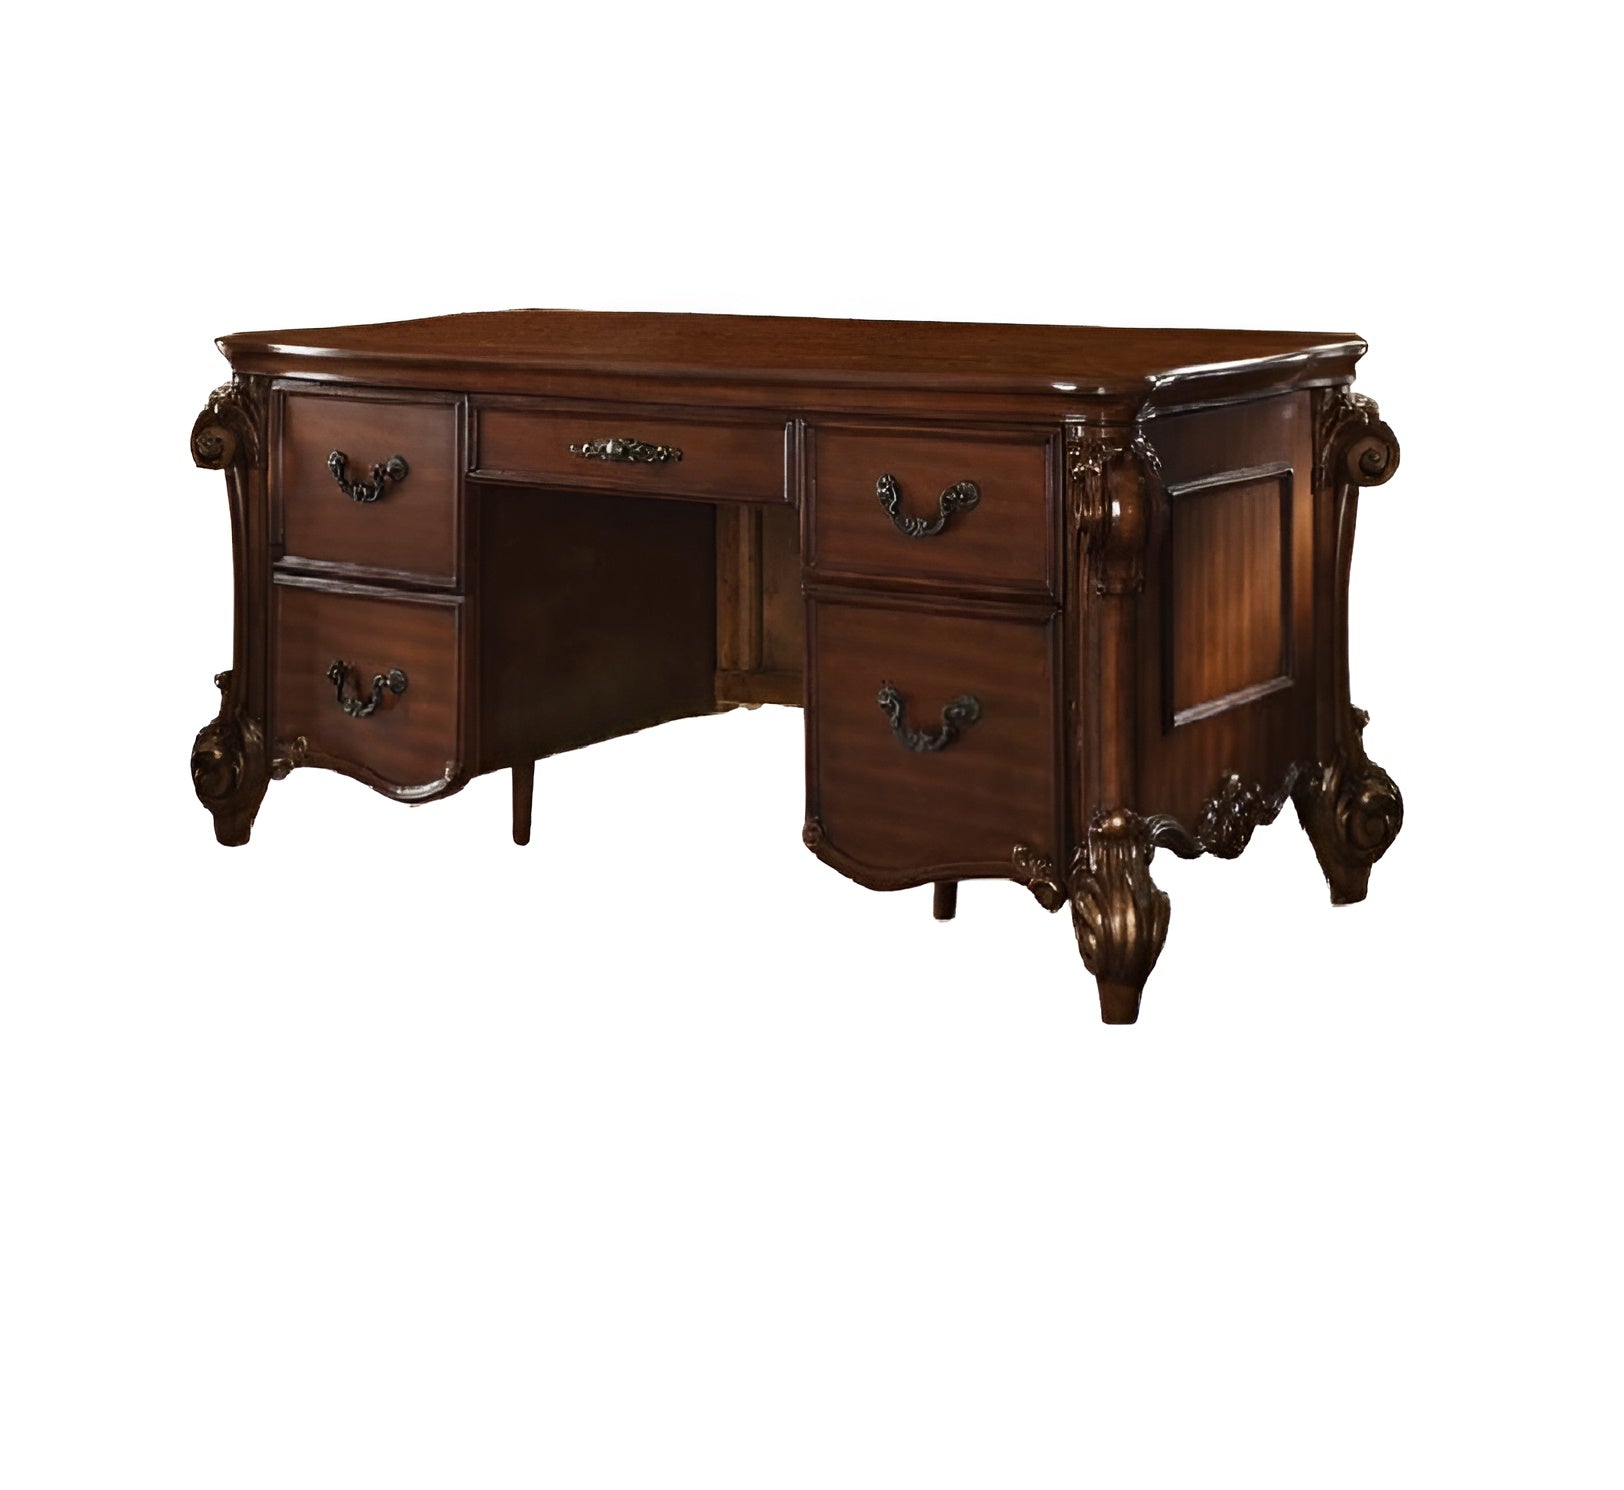 74" Brown Executive Desk With Five Drawers